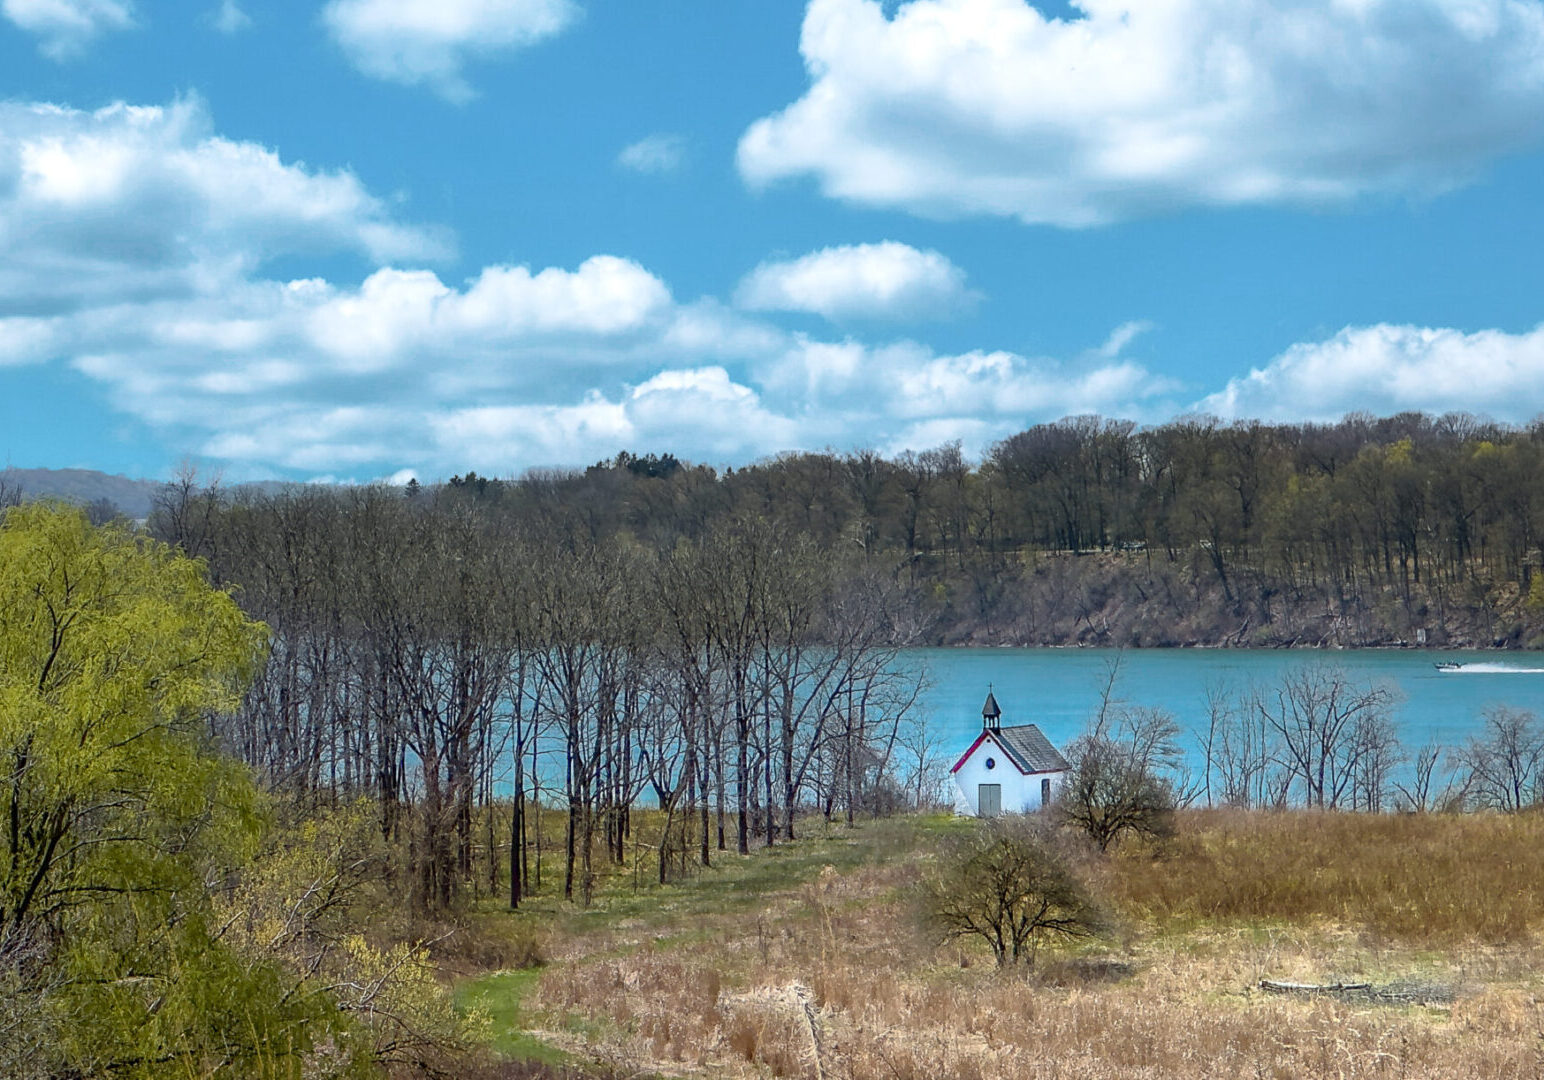 Stella Niagara preserve with trees starting to bloom, tall grass covers the foreground in front of a small white isolated church, the turquoise waters of the mighty Niagara River flow past, and a motor boat skims the water